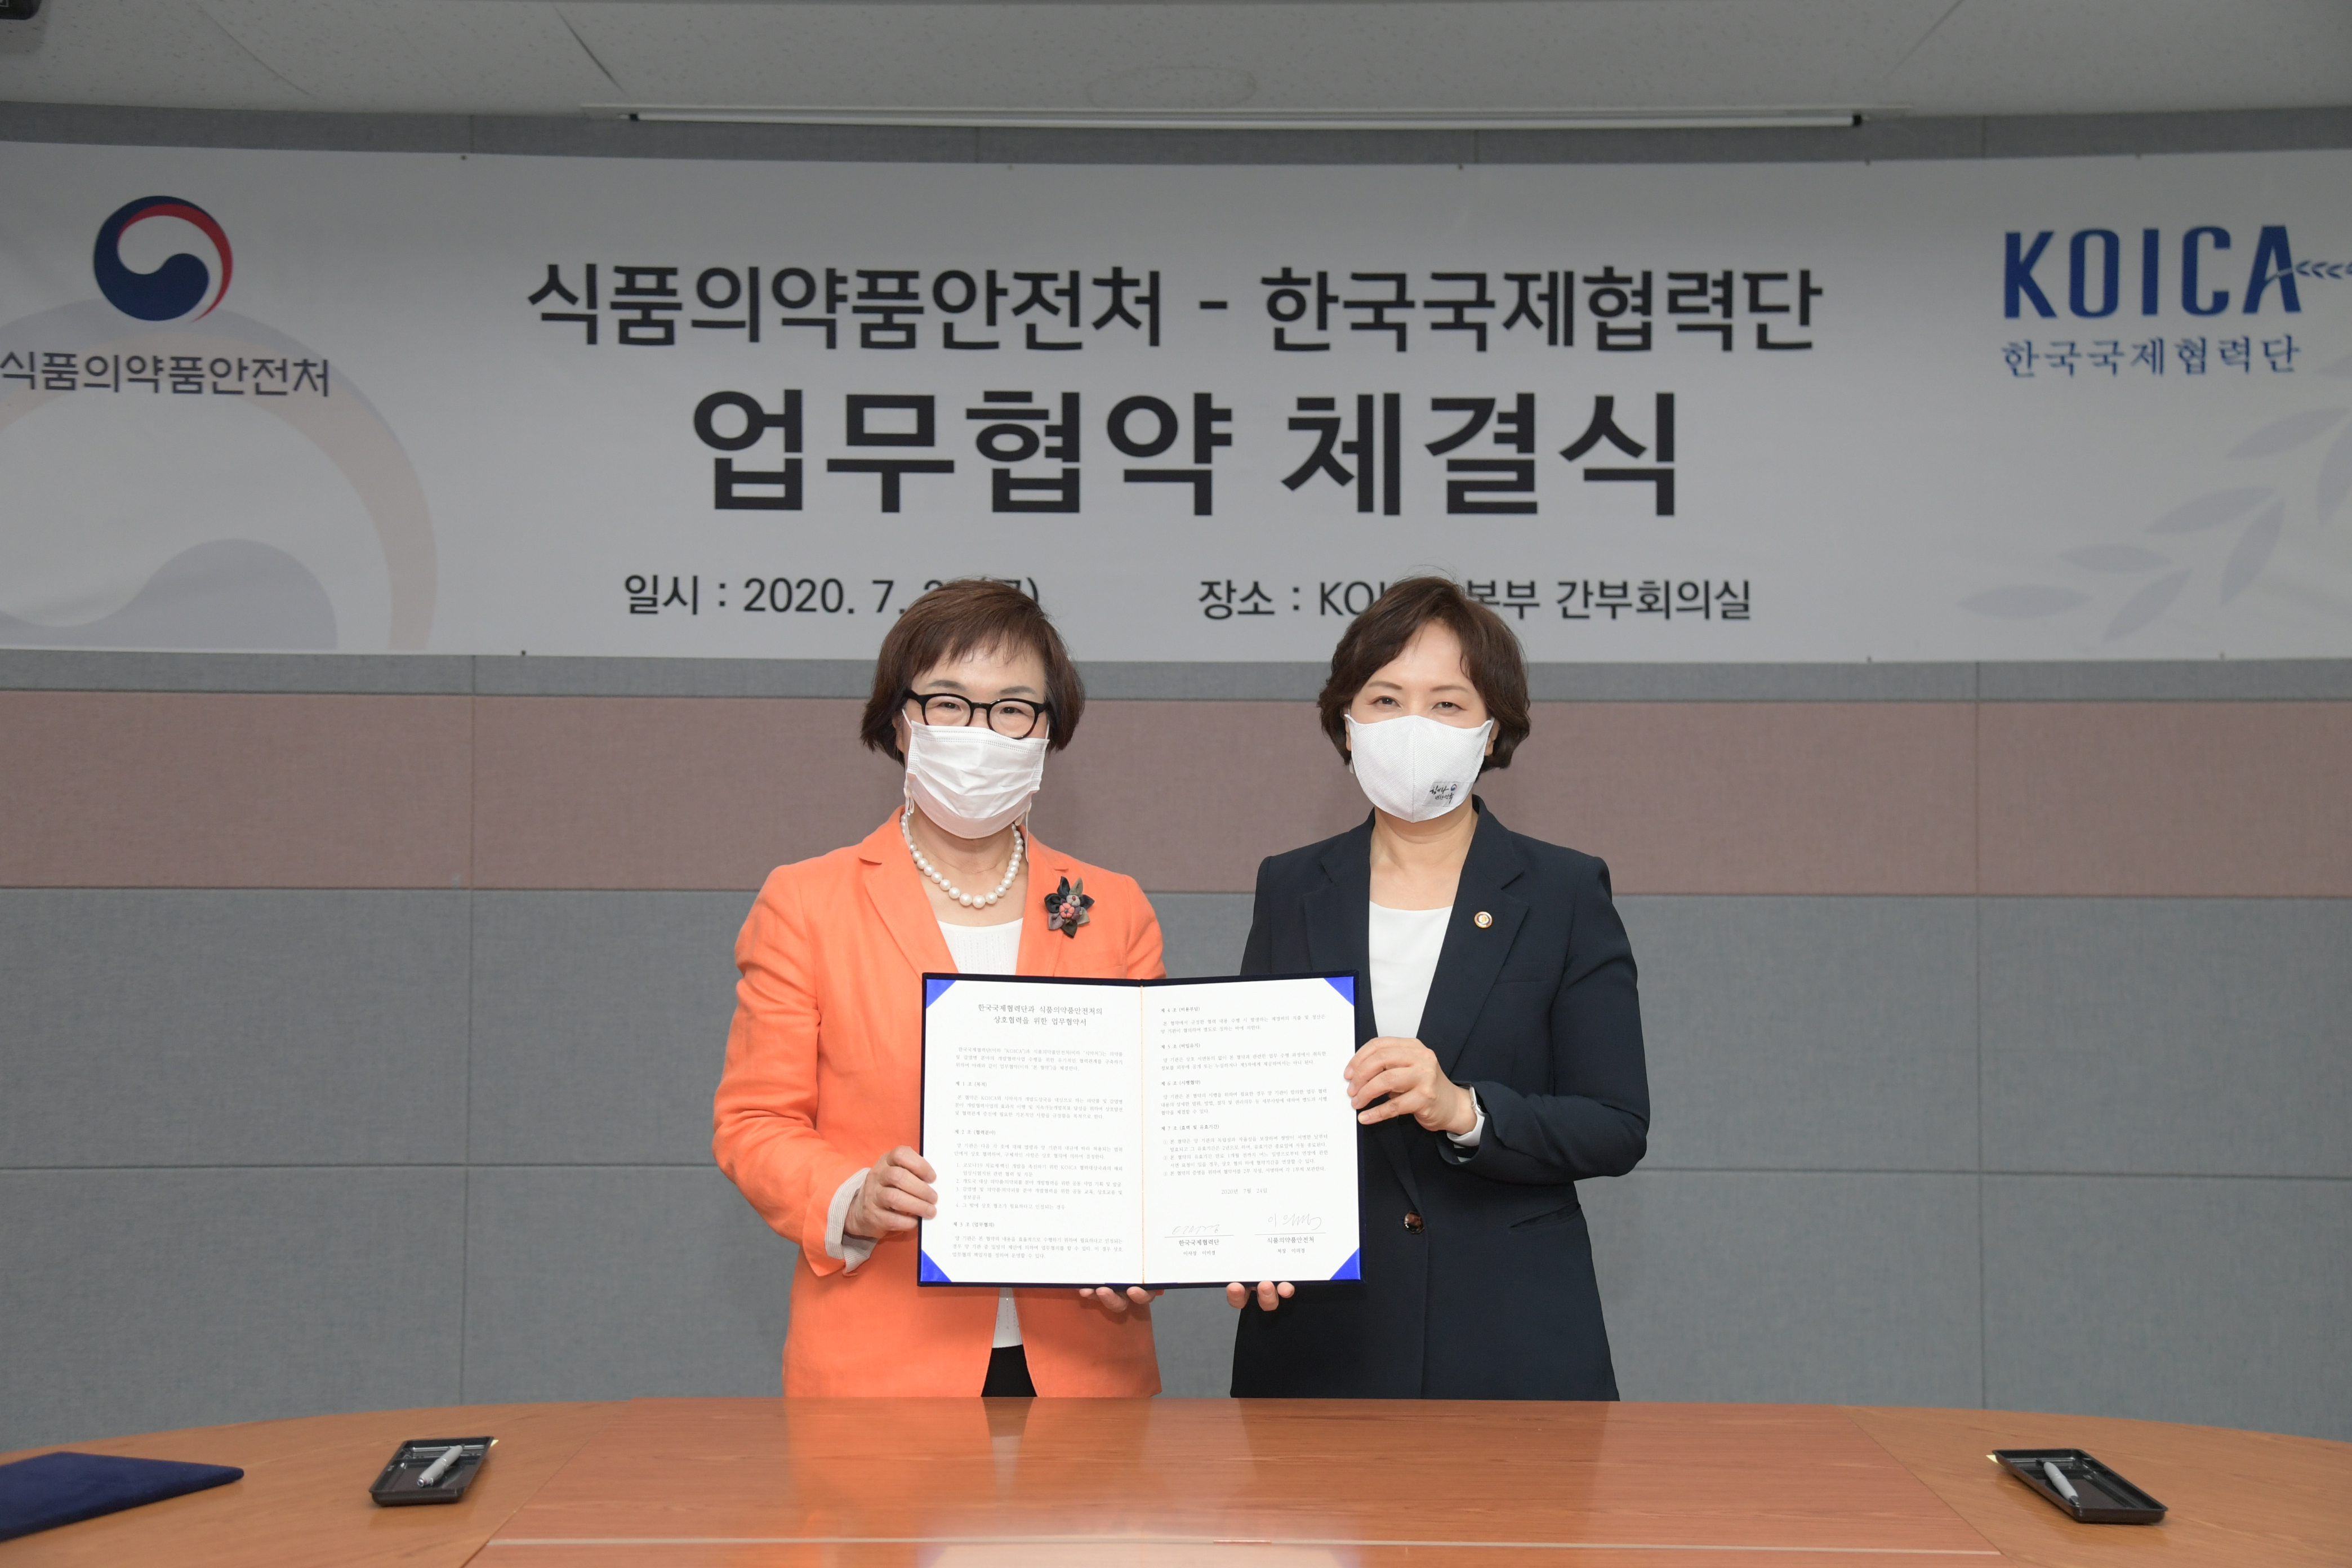 Photo News1 - [Jul. 27, 2020] Ministry of Food and Drug Safety and Korea International Cooperation Agency sign an MOU